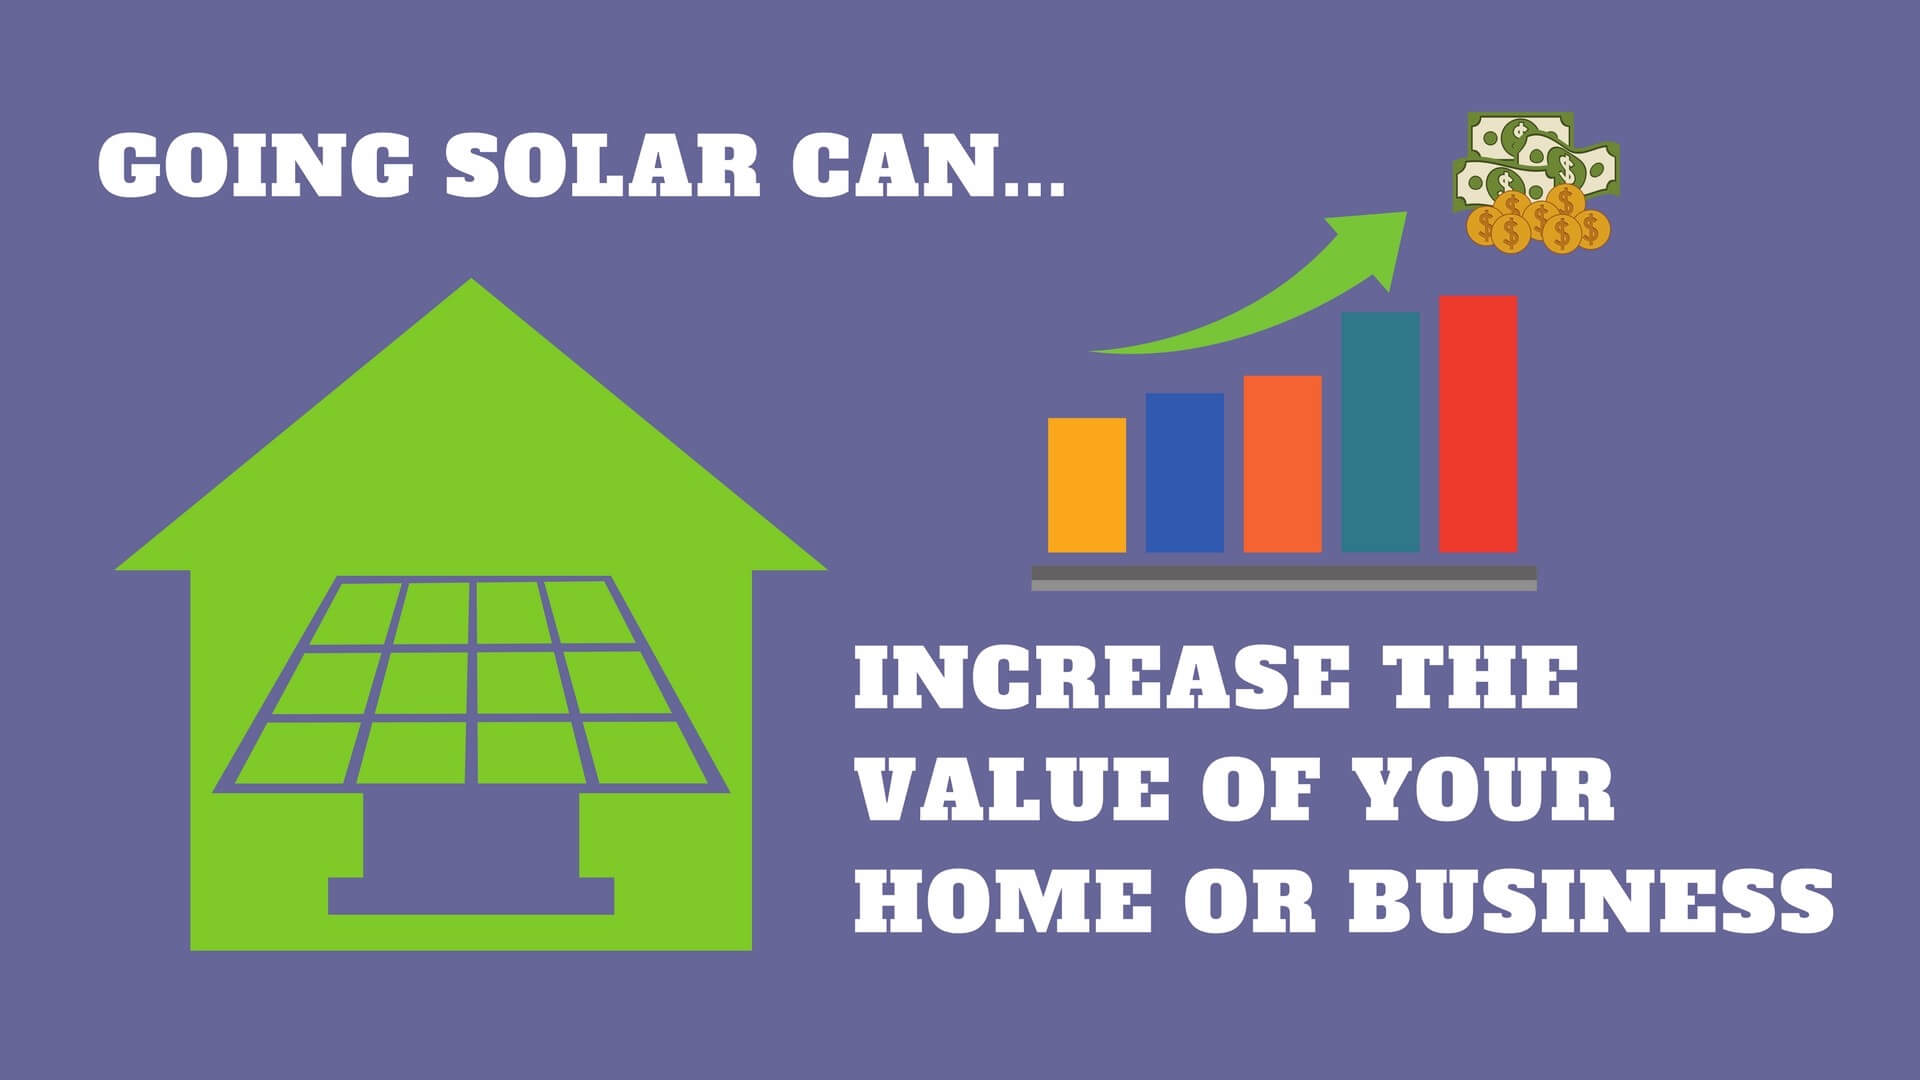 Installing solar electric system on your home or business can potentially increase your property value. 